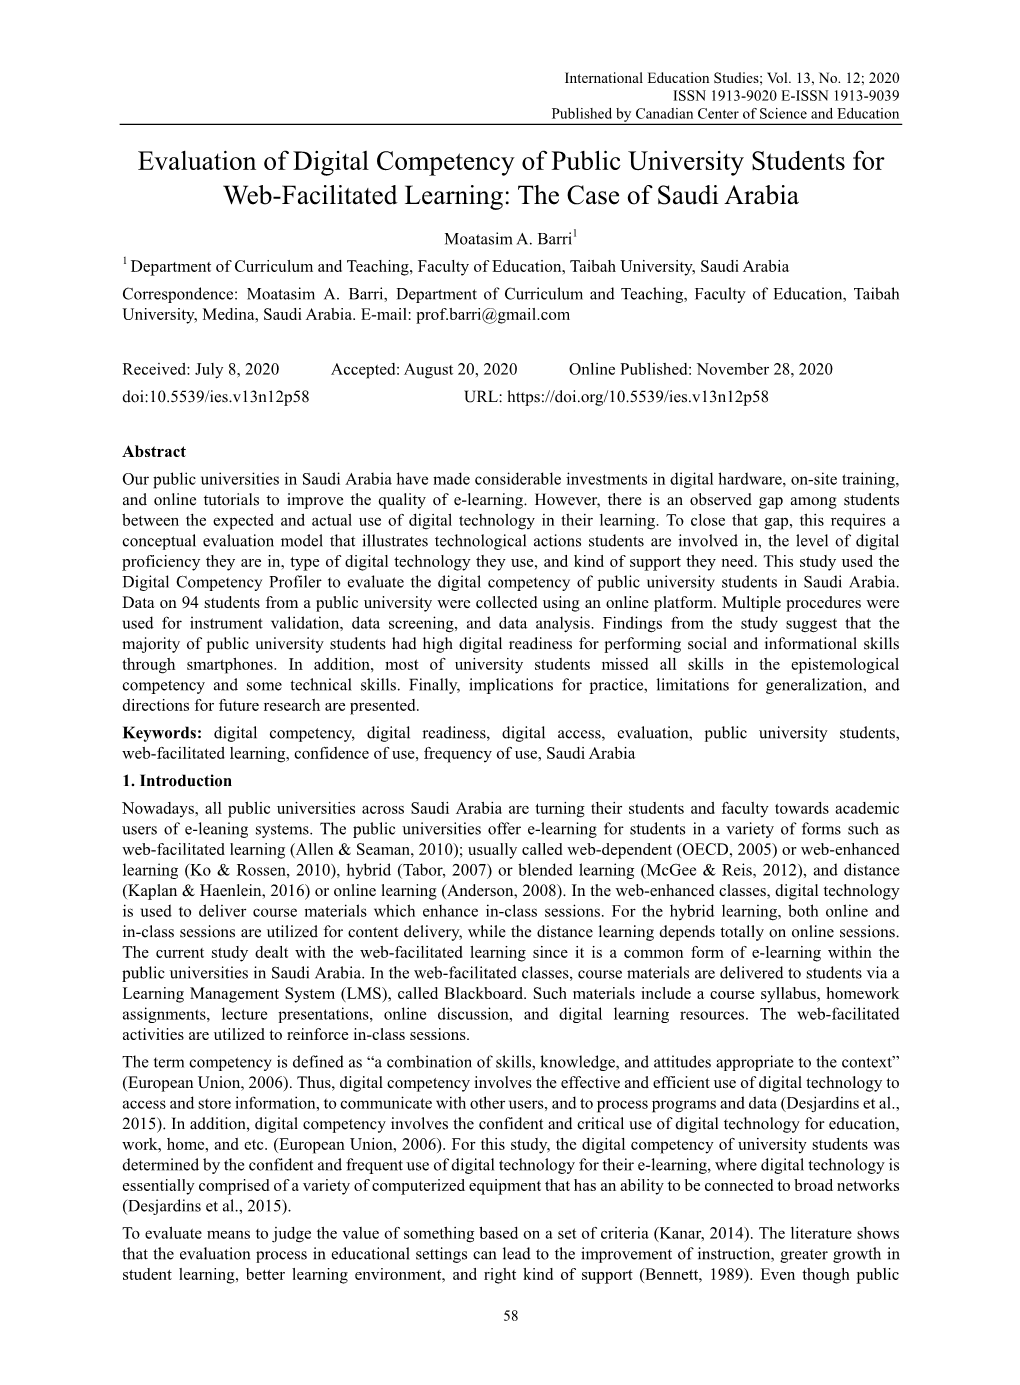 Evaluation of Digital Competency of Public University Students for Web-Facilitated Learning: the Case of Saudi Arabia